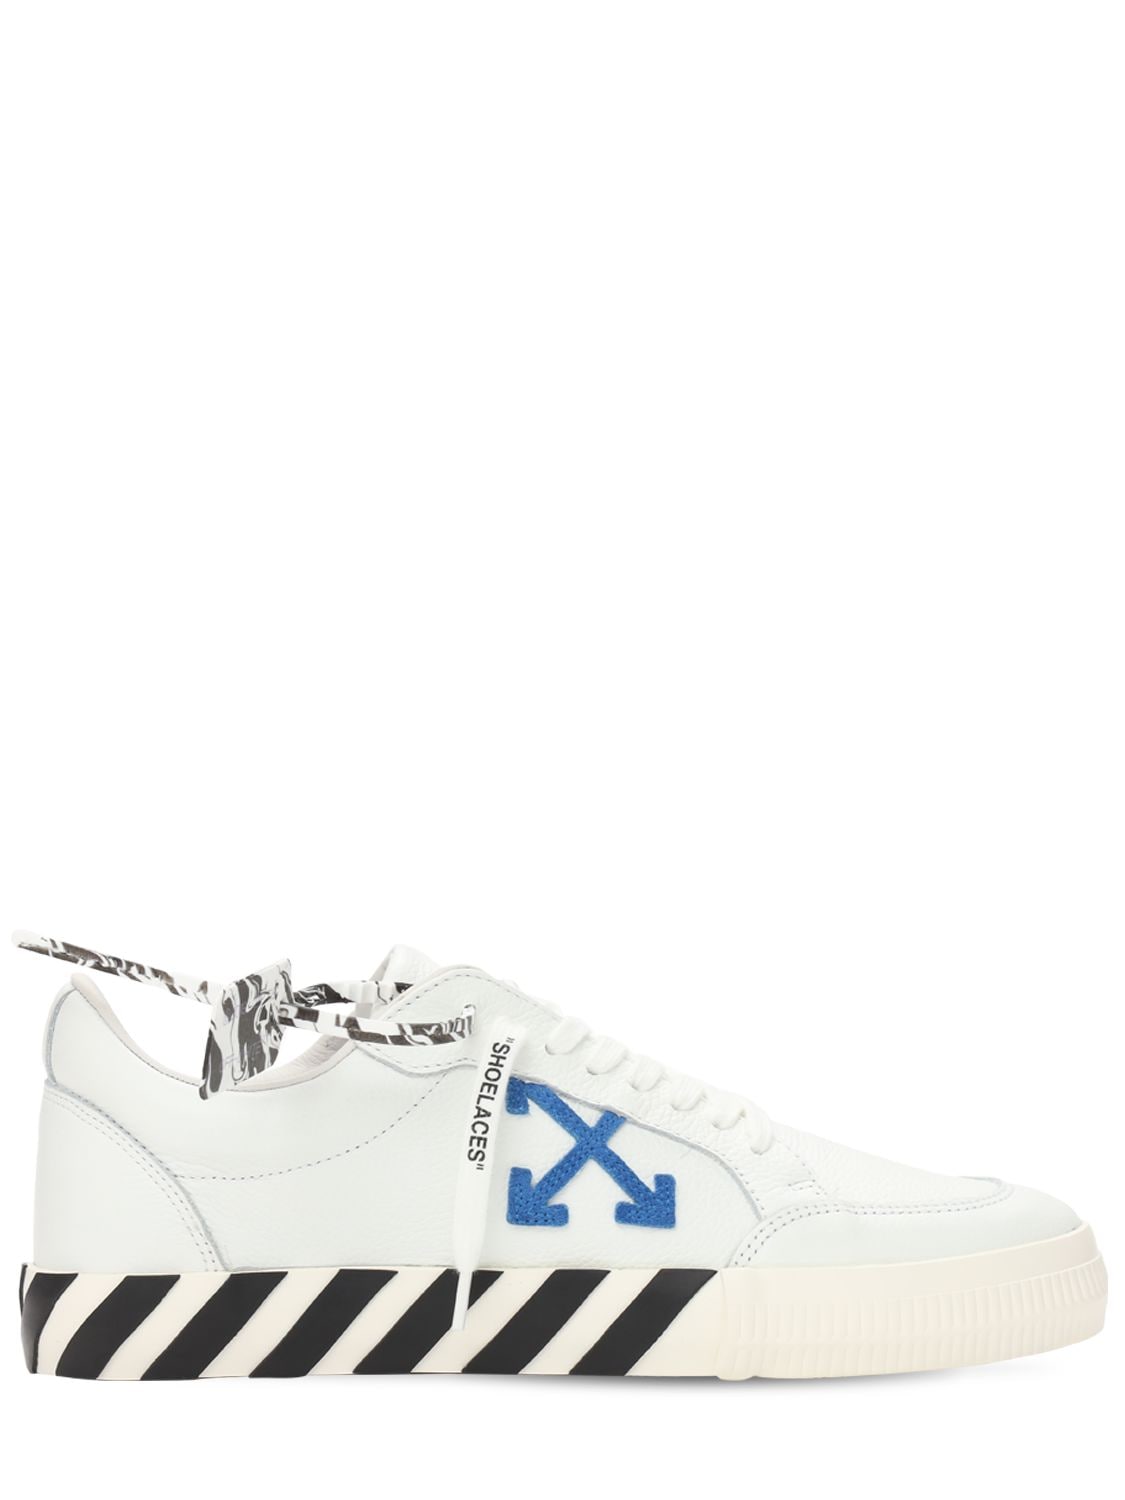 Off-White - Vulcanized leather low sneakers - White/Blue | Luisaviaroma